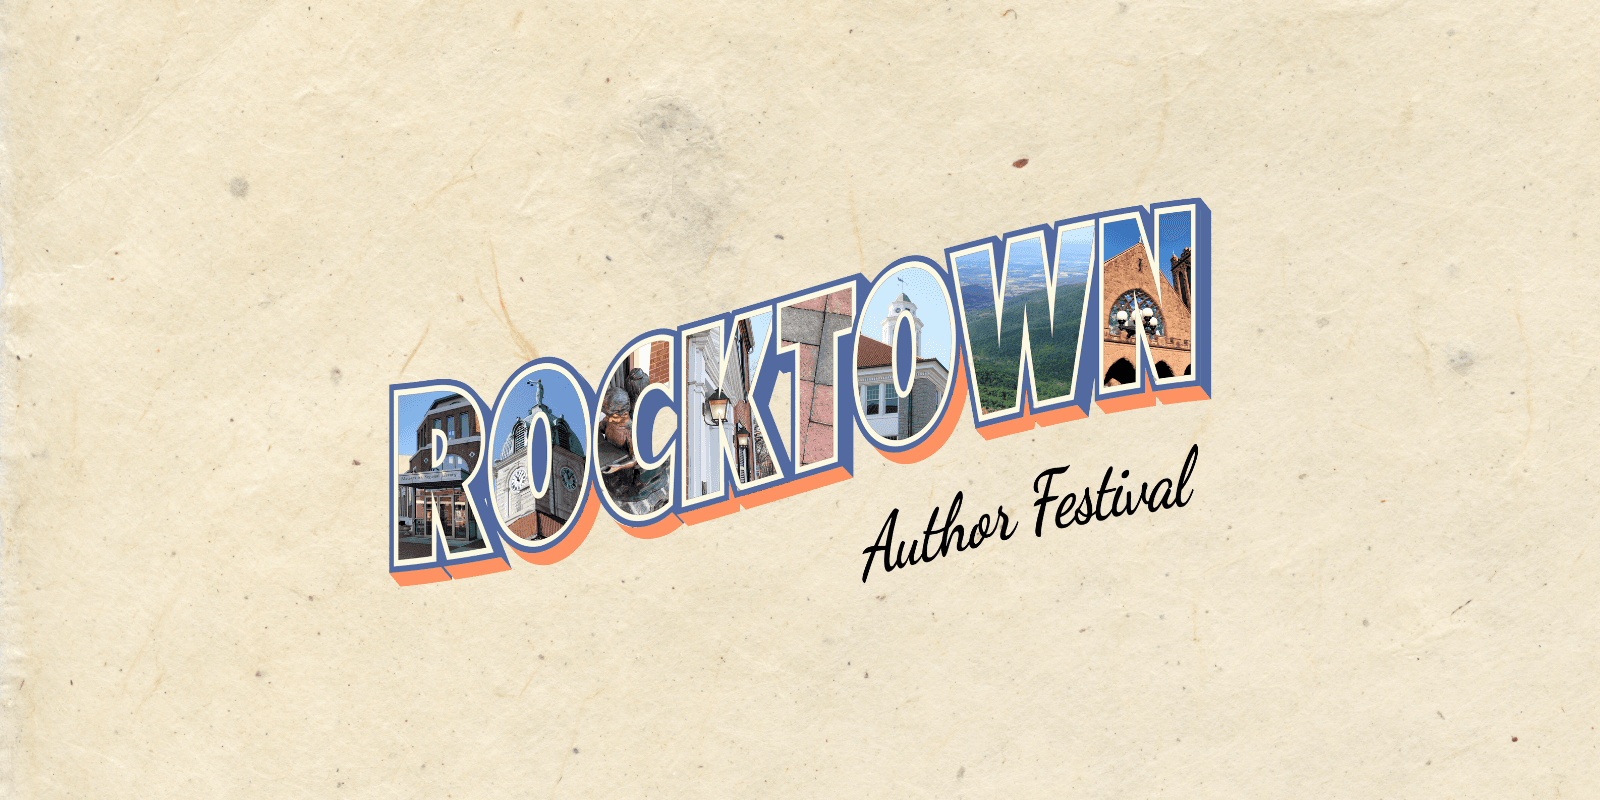 Attend the Rocktown Author Festival!